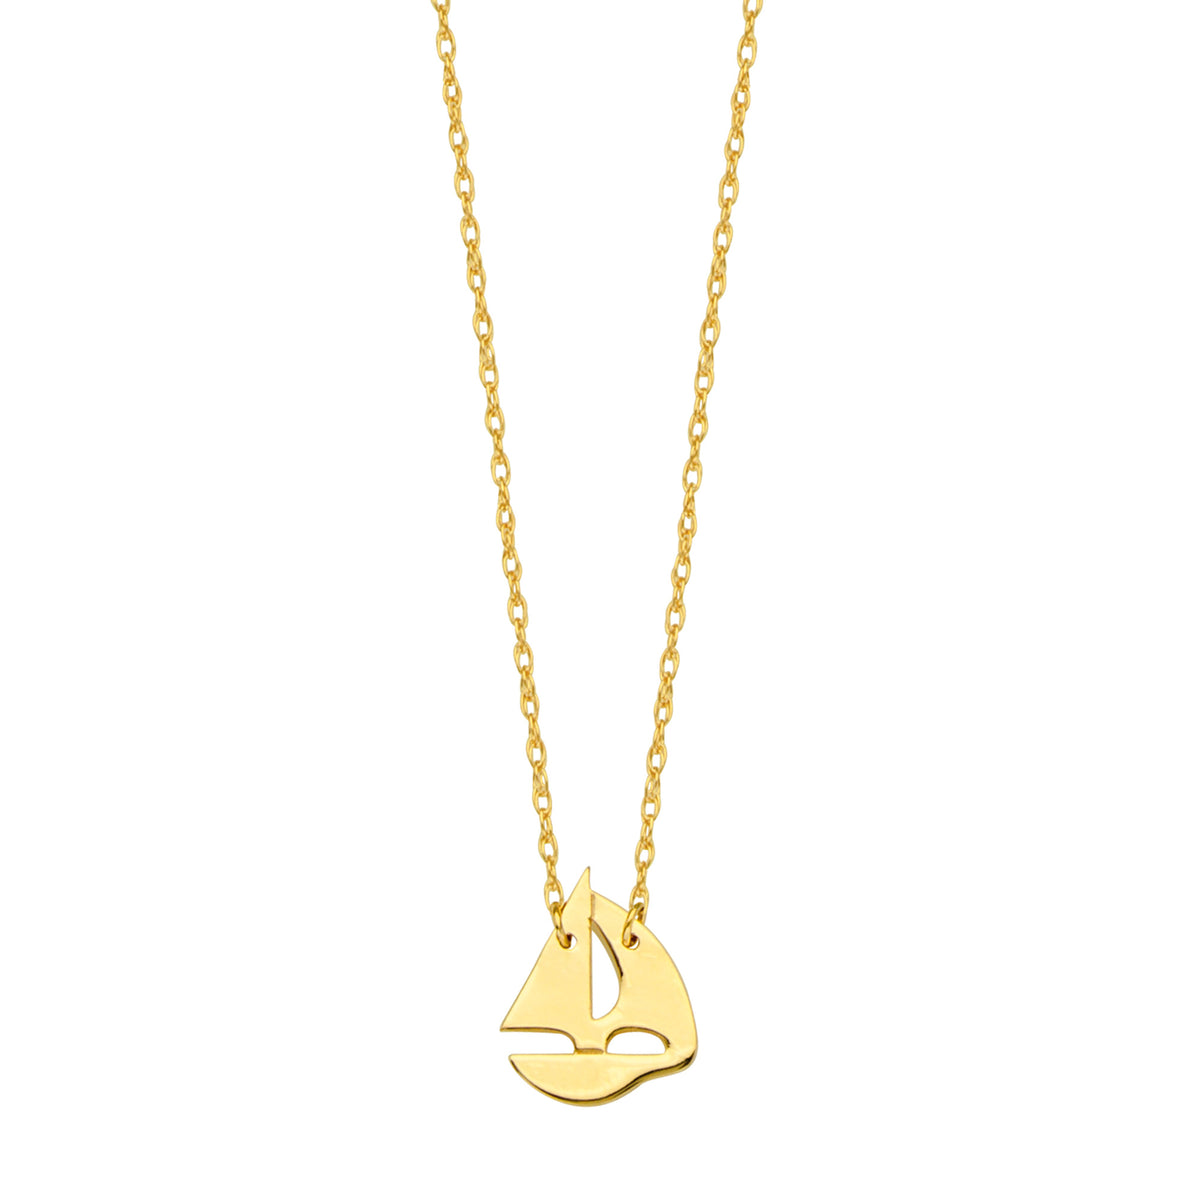 14K Yellow Gold Mini Sailing Boat Pendant Necklace, 16" To 18" Adjustable